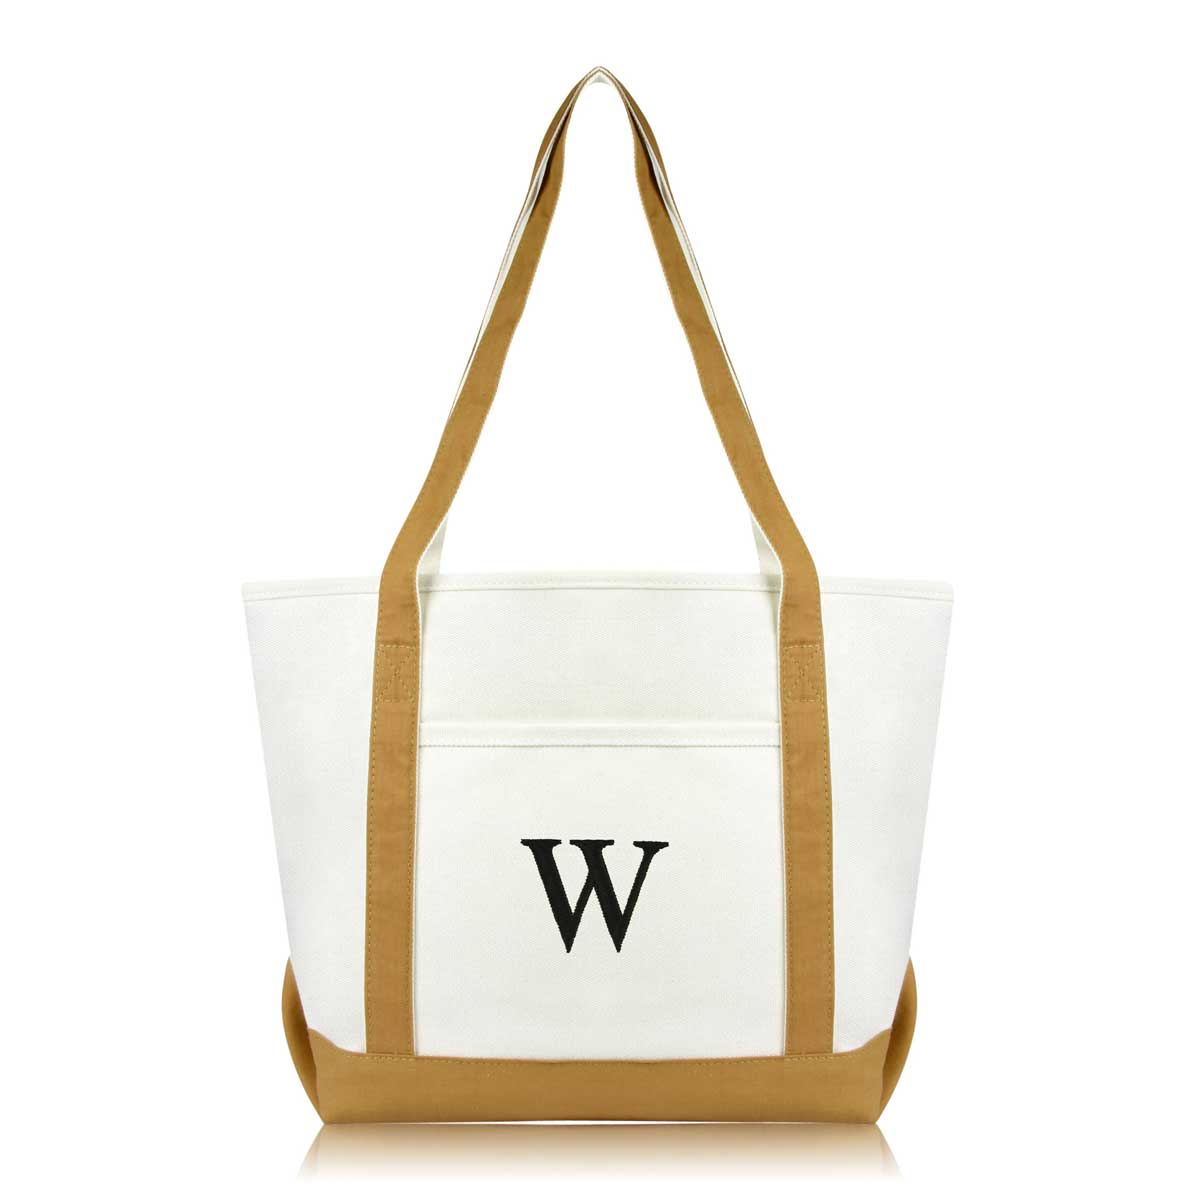 Dalix Medium Personalized Tote Bag Monogrammed Initial Letter - W